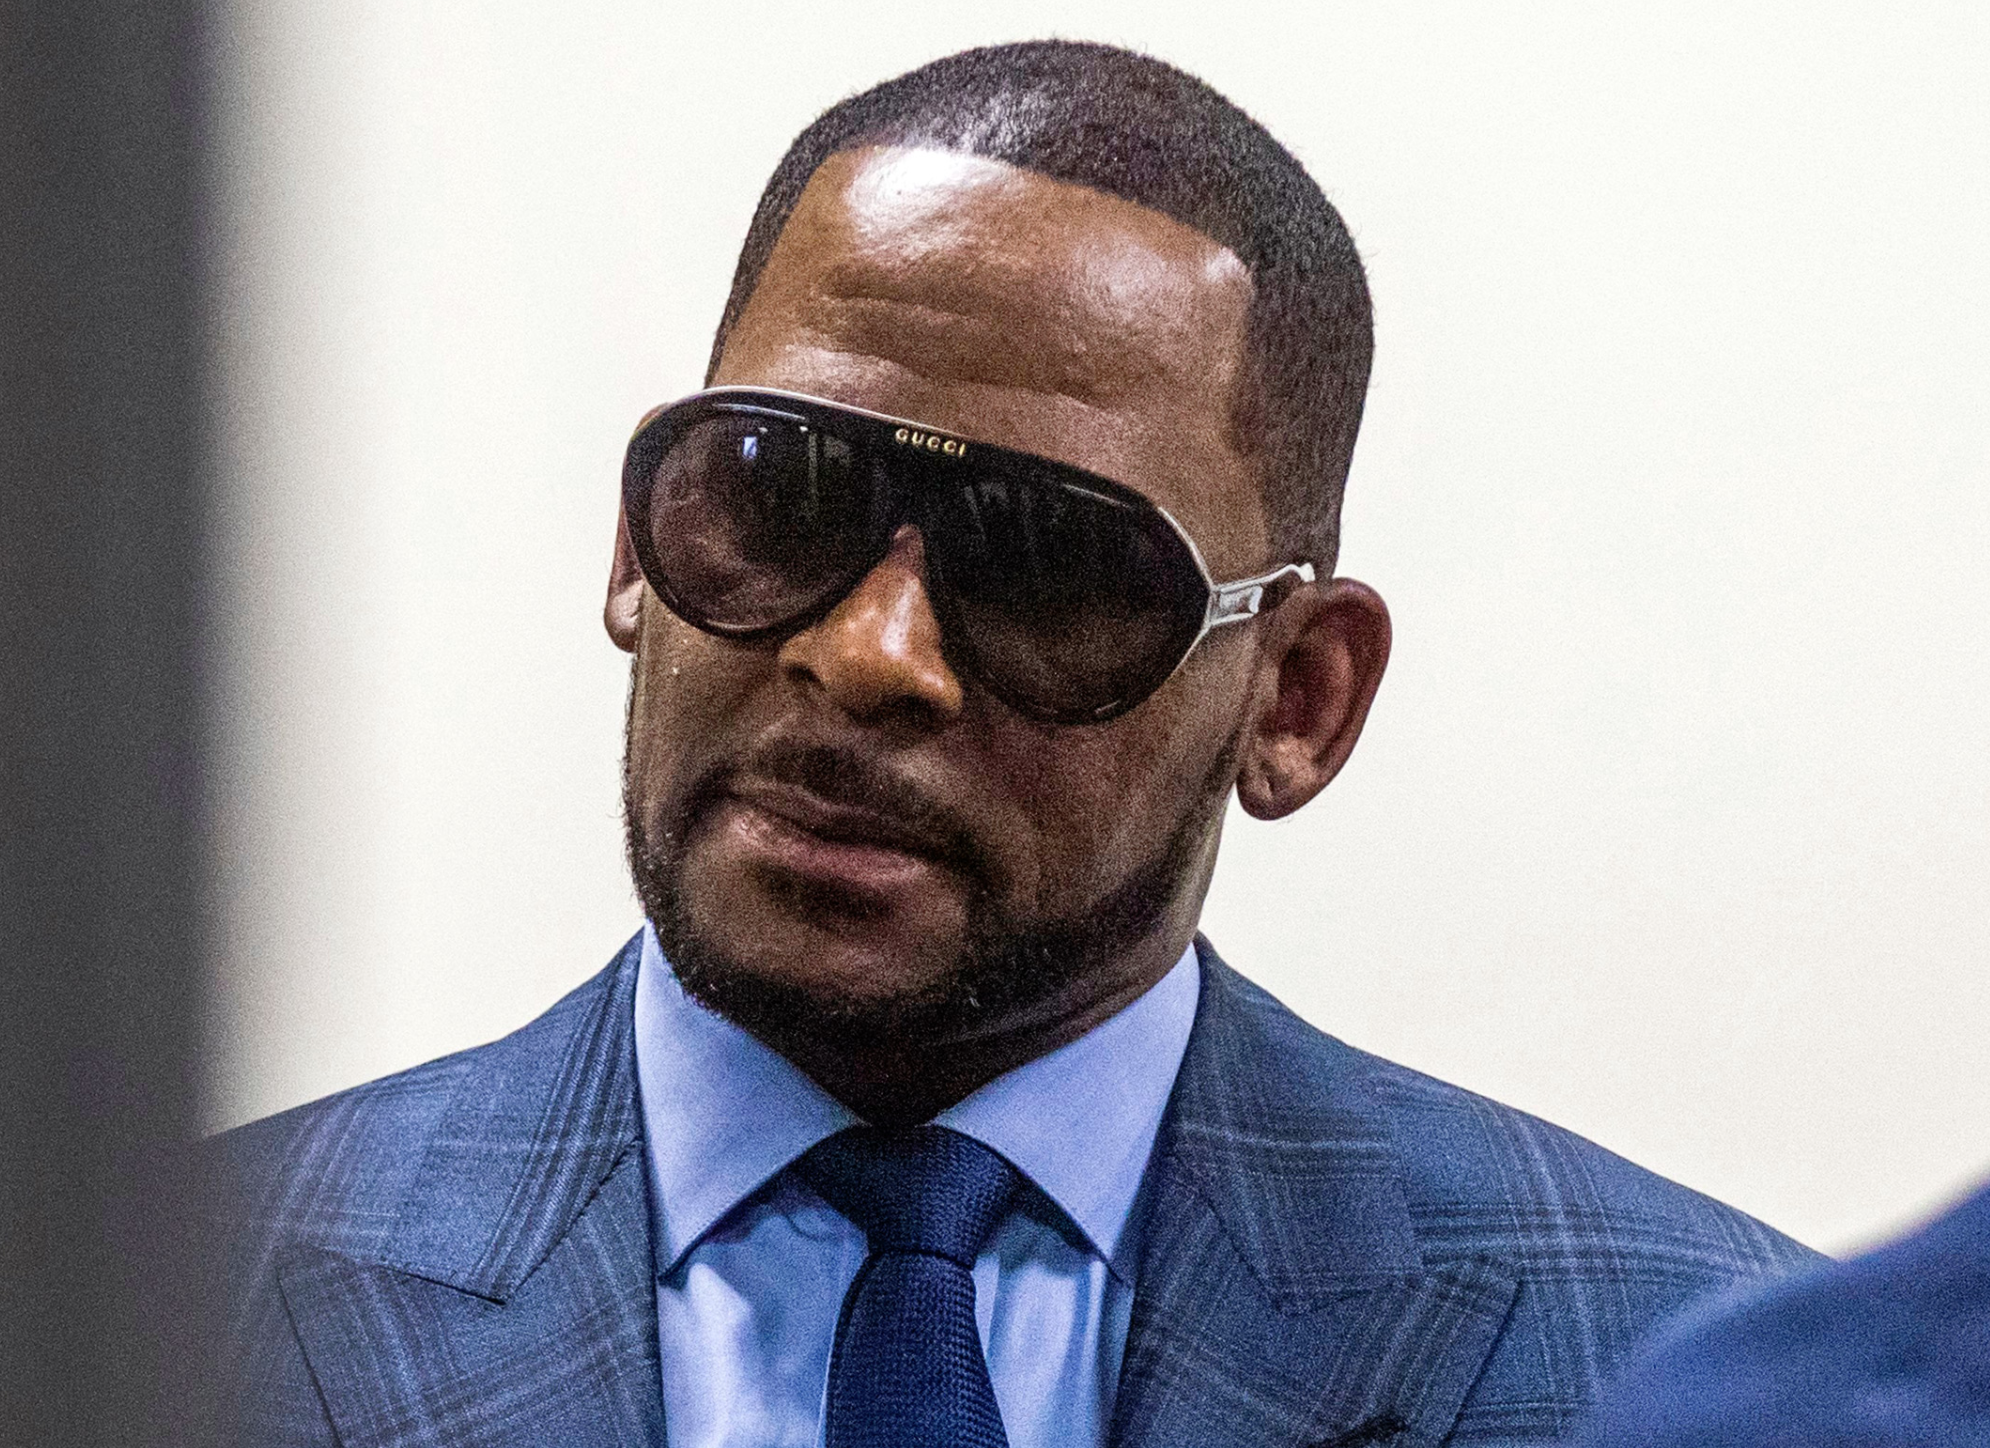 R. Kelly “Surviving R. Kelly” Docuseries Victims Awarded $10.5 Million